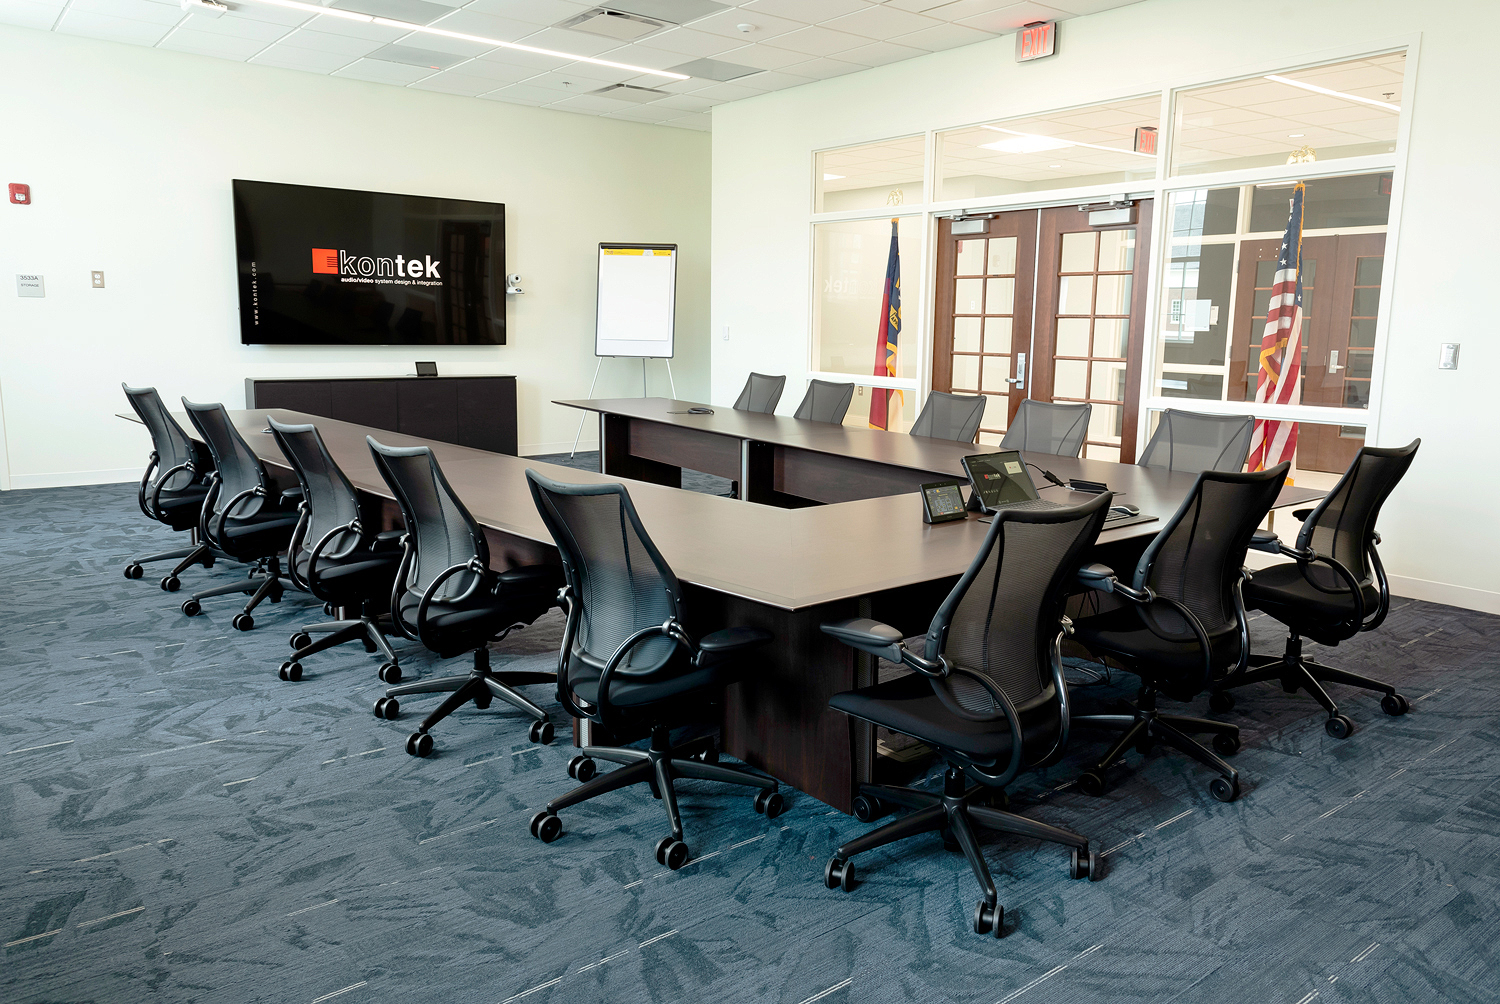 Thumbnail image of conference room